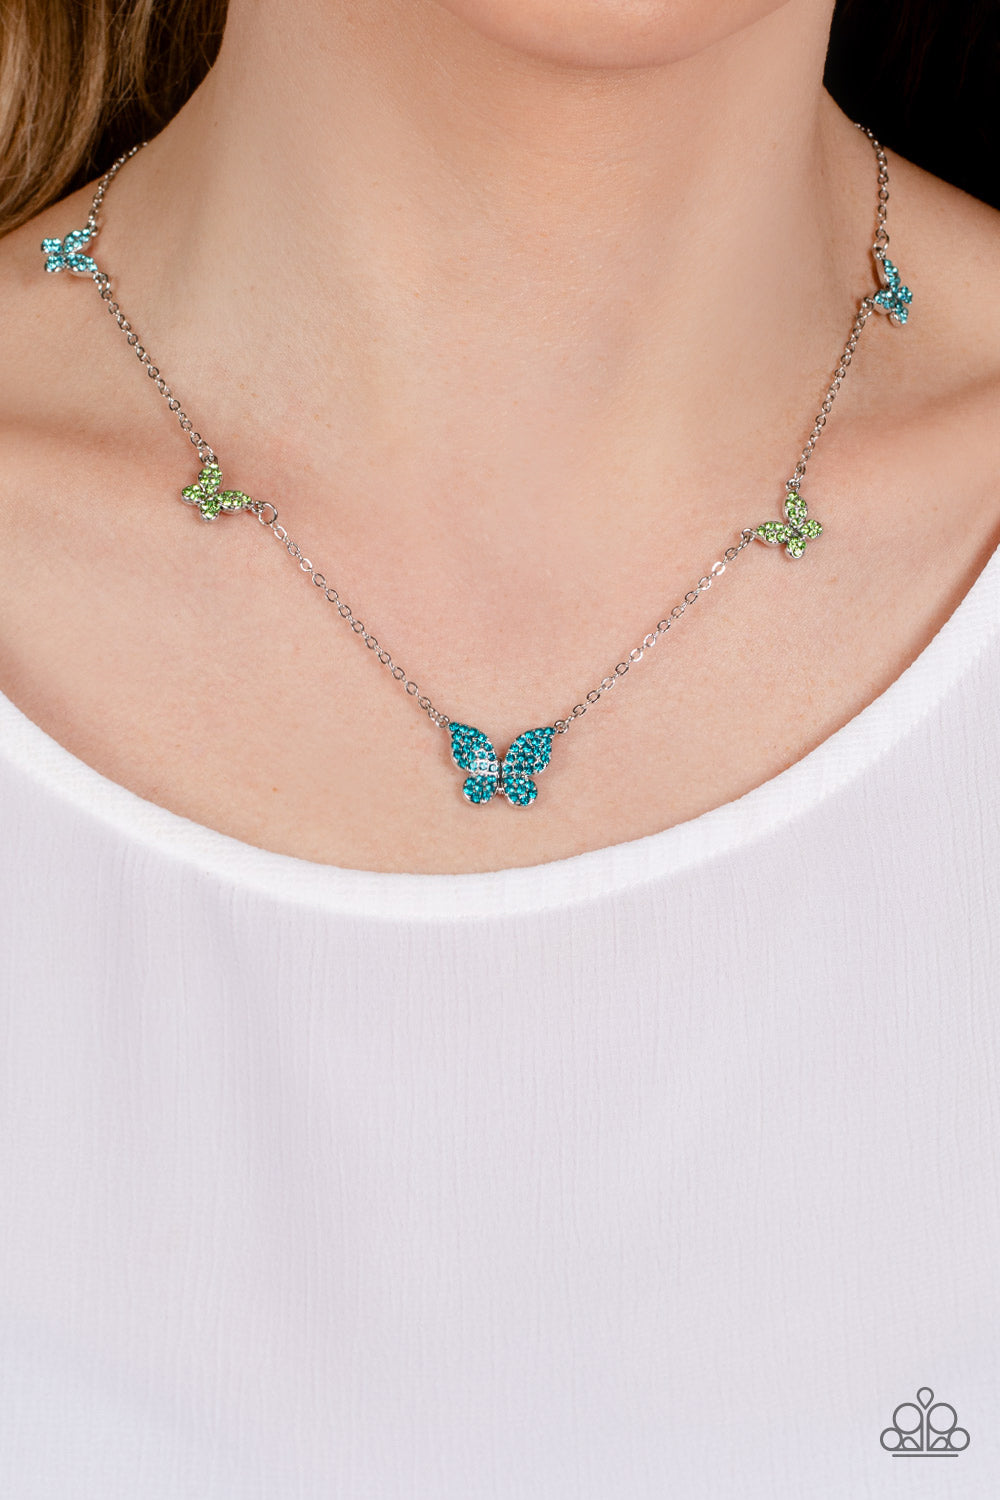 Paparazzi FAIRY Special Butterfly Necklaces